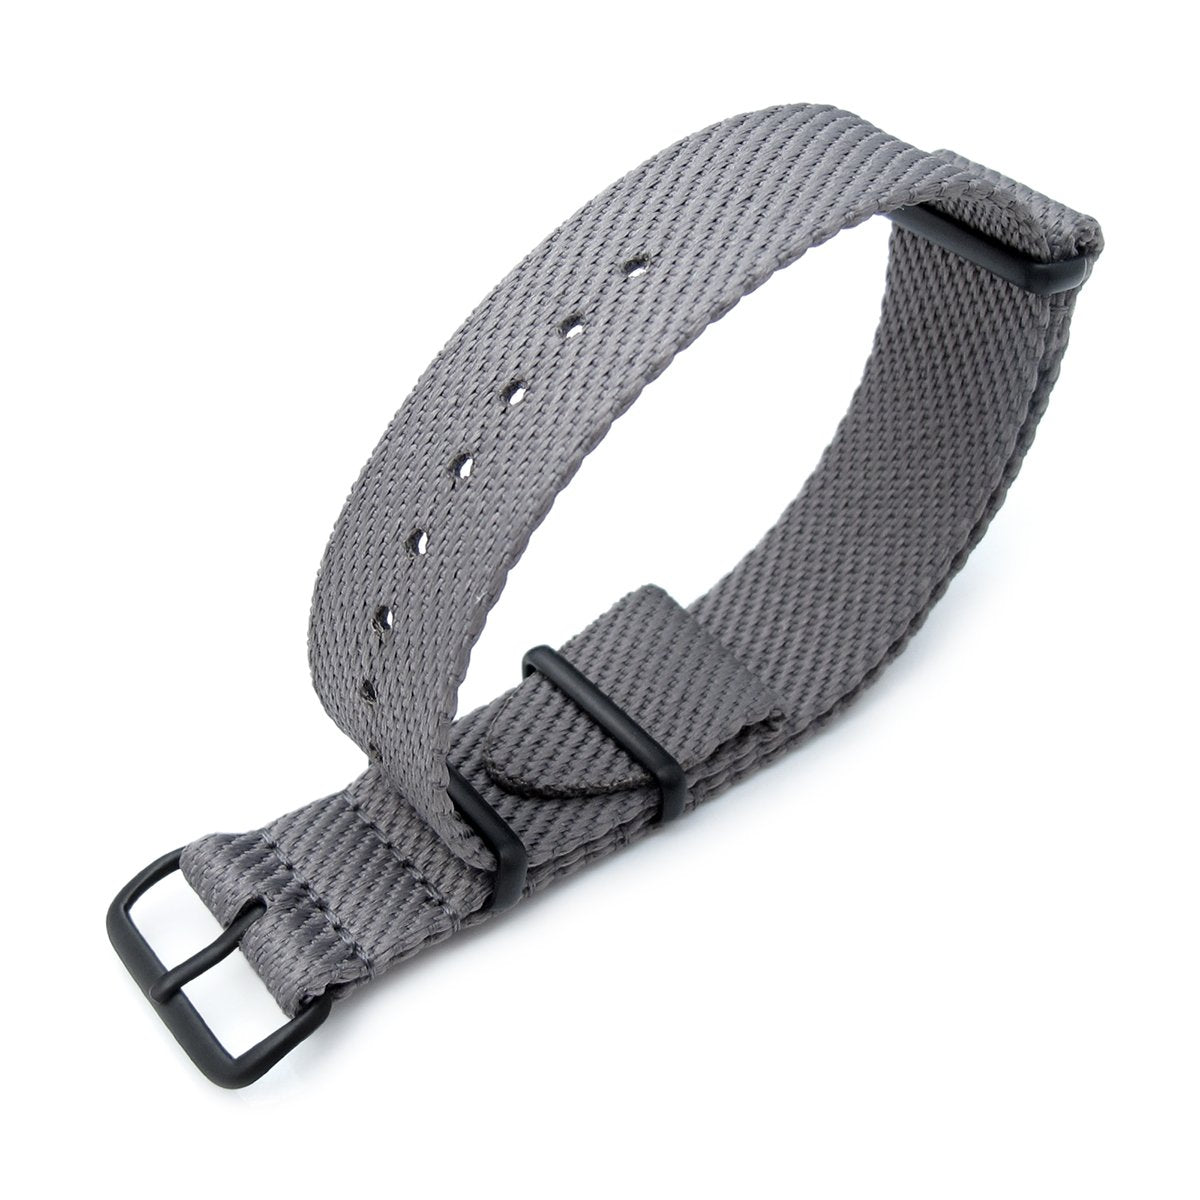 MiLTAT 20mm G10 Military NATO Watch Strap Waffle Nylon Armband PVD Military Grey Strapcode Watch Bands